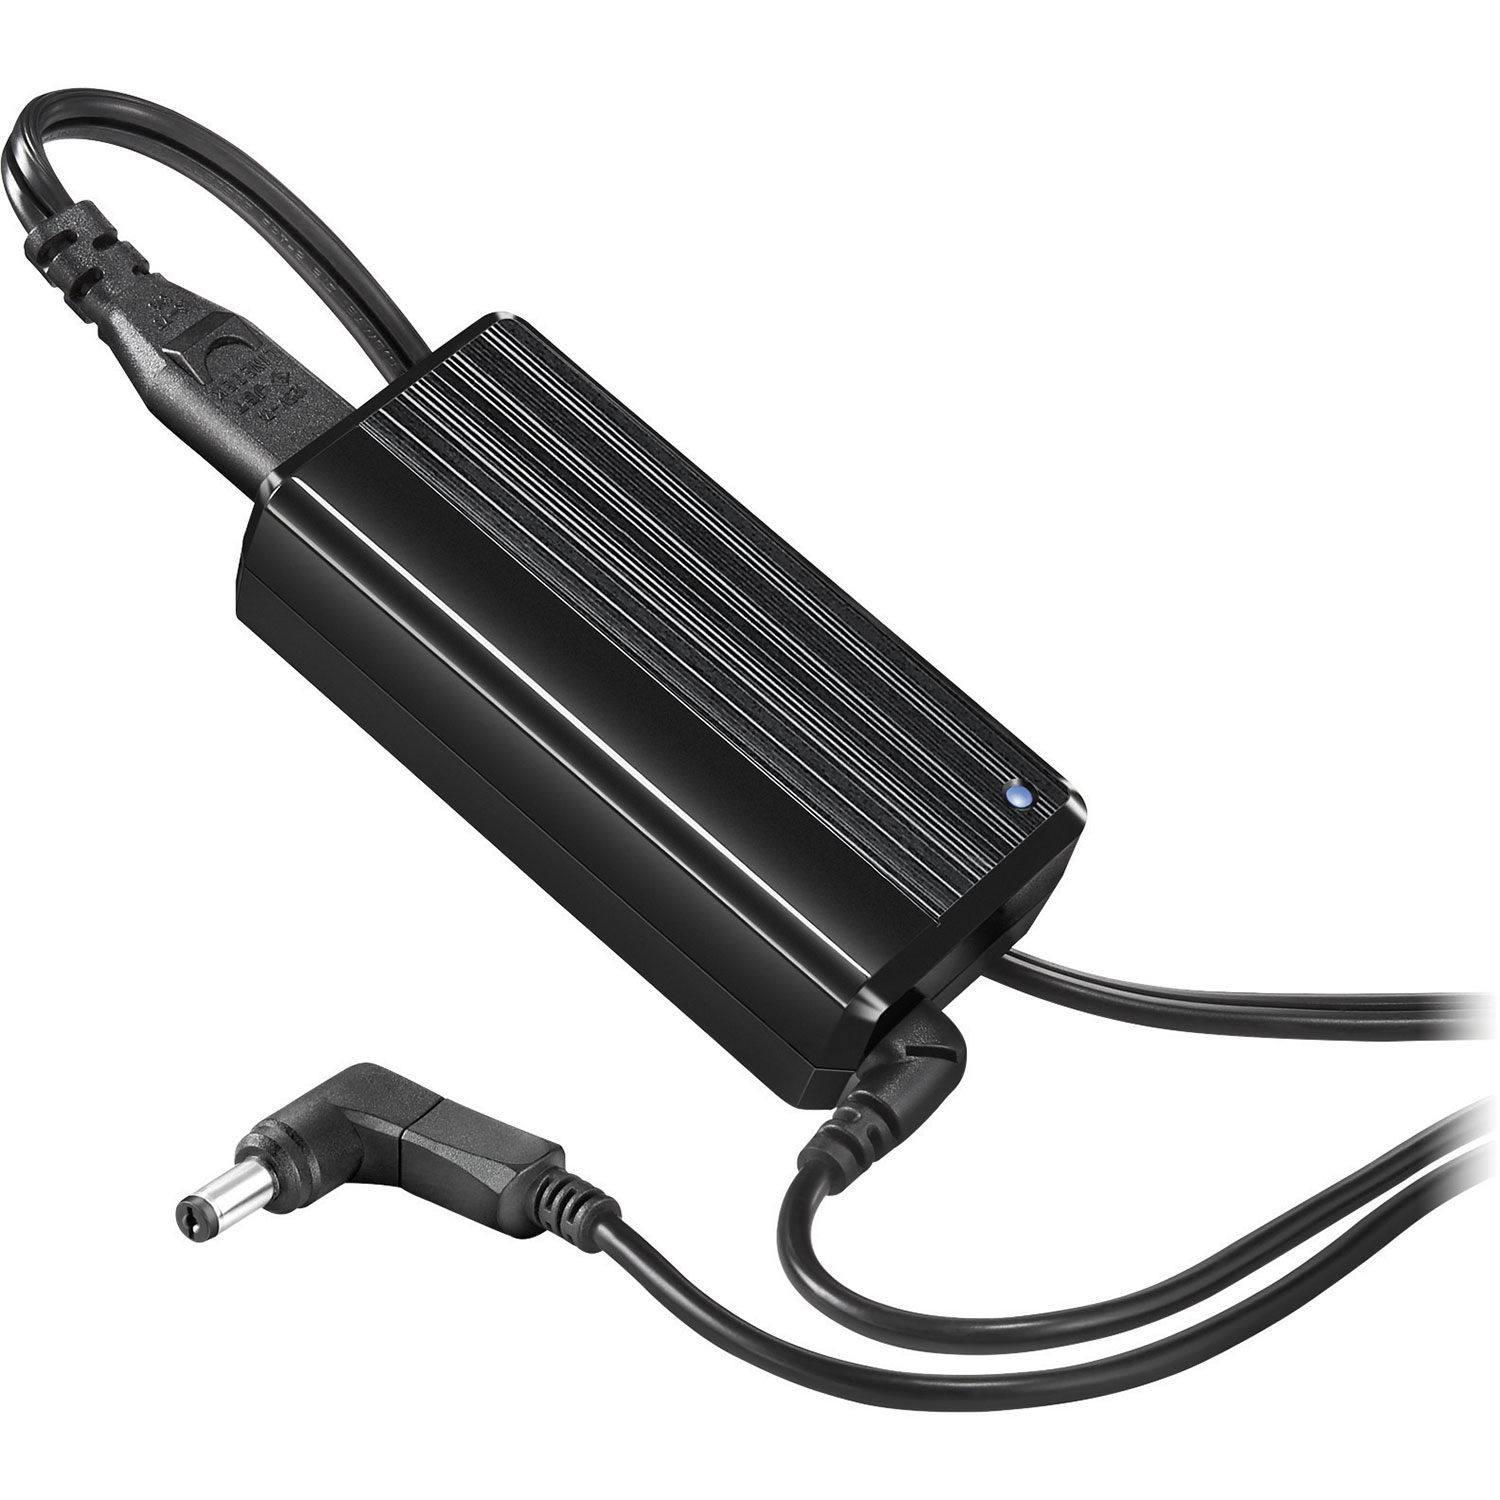 Insignia 65W Universal Ultrabook Laptop Charger (NS-PWLC663-C) - Black - Only at Best Buy